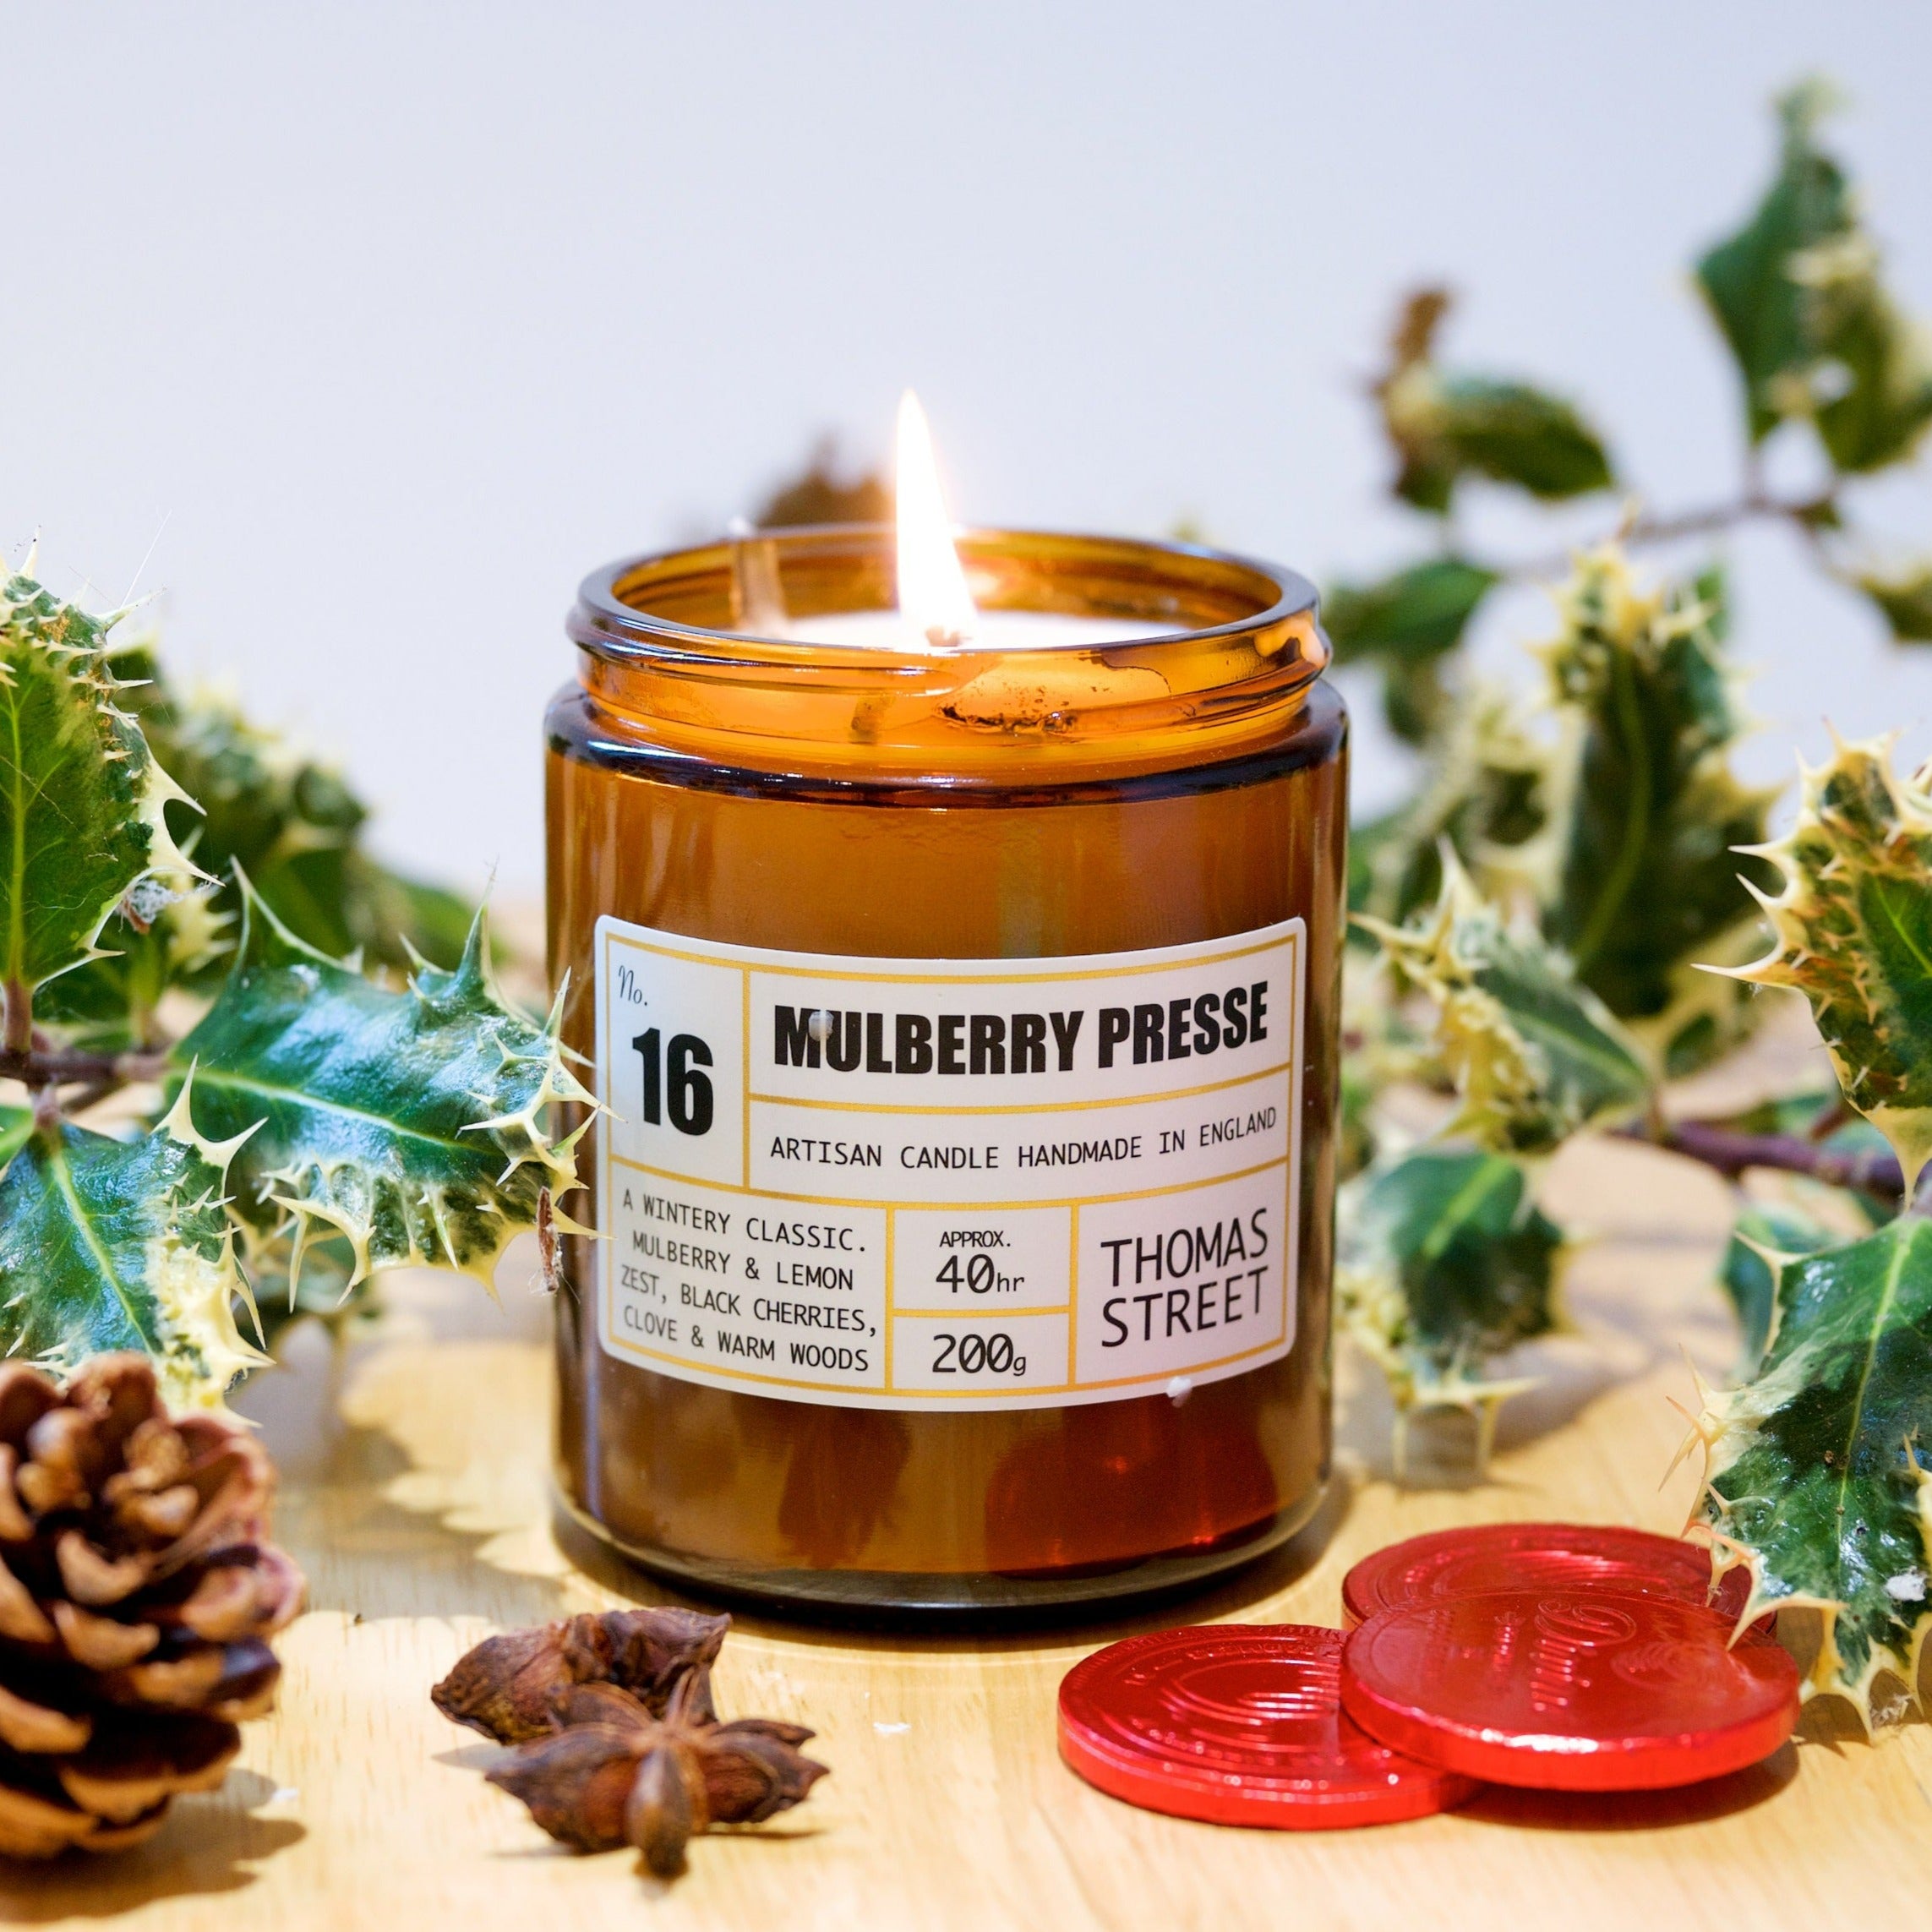 Thomas Street Mulberry Presse Scented Candle